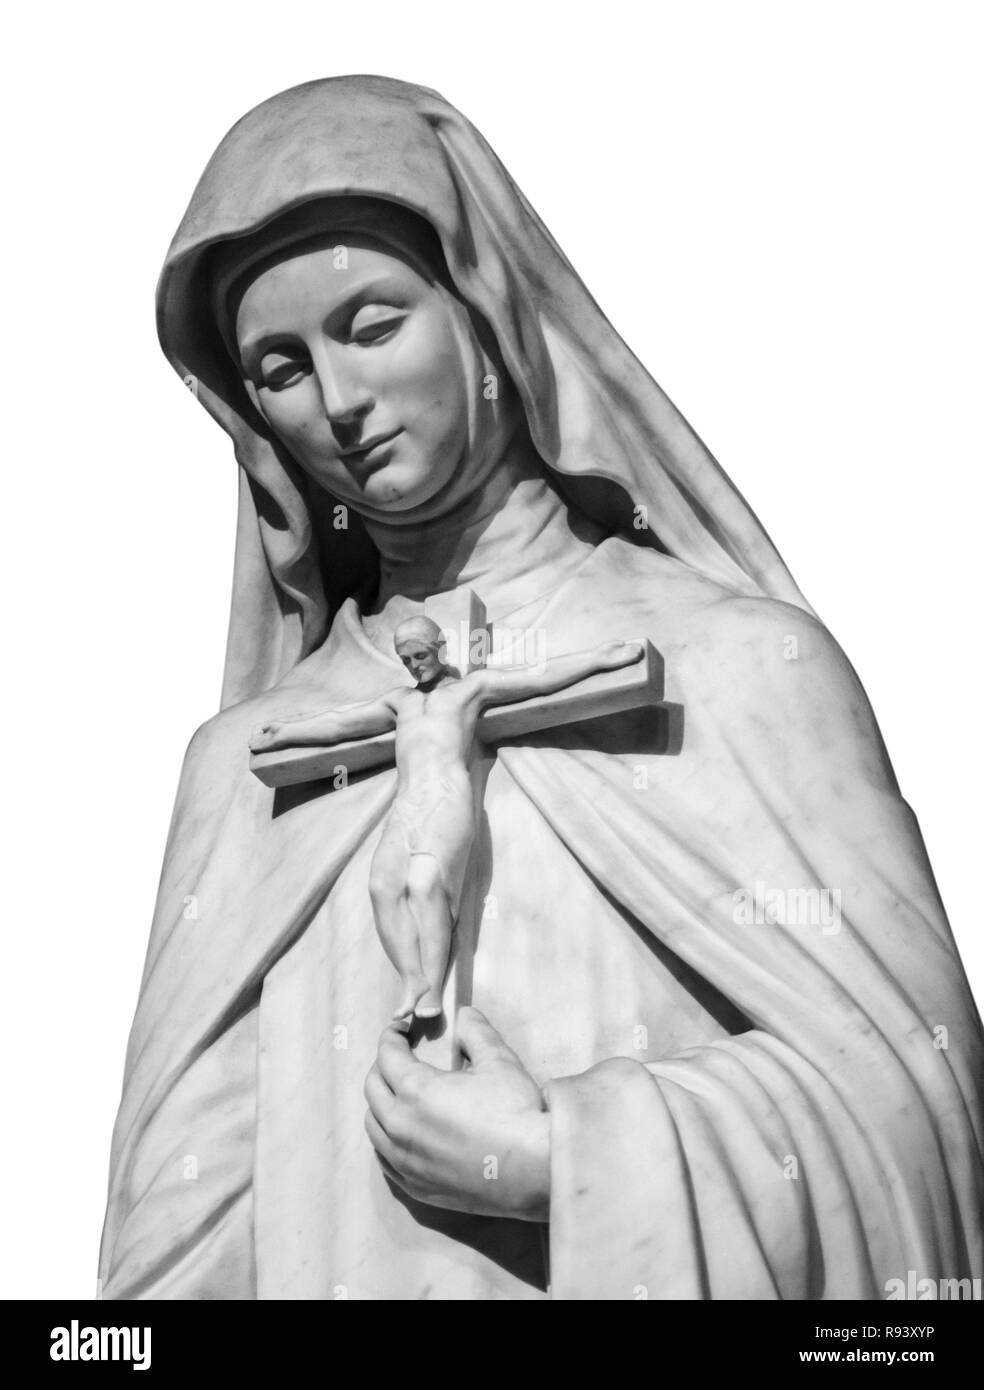 Ancienne statue de la Vierge Marie statue withwoman crucifixion with clipping path. Banque D'Images